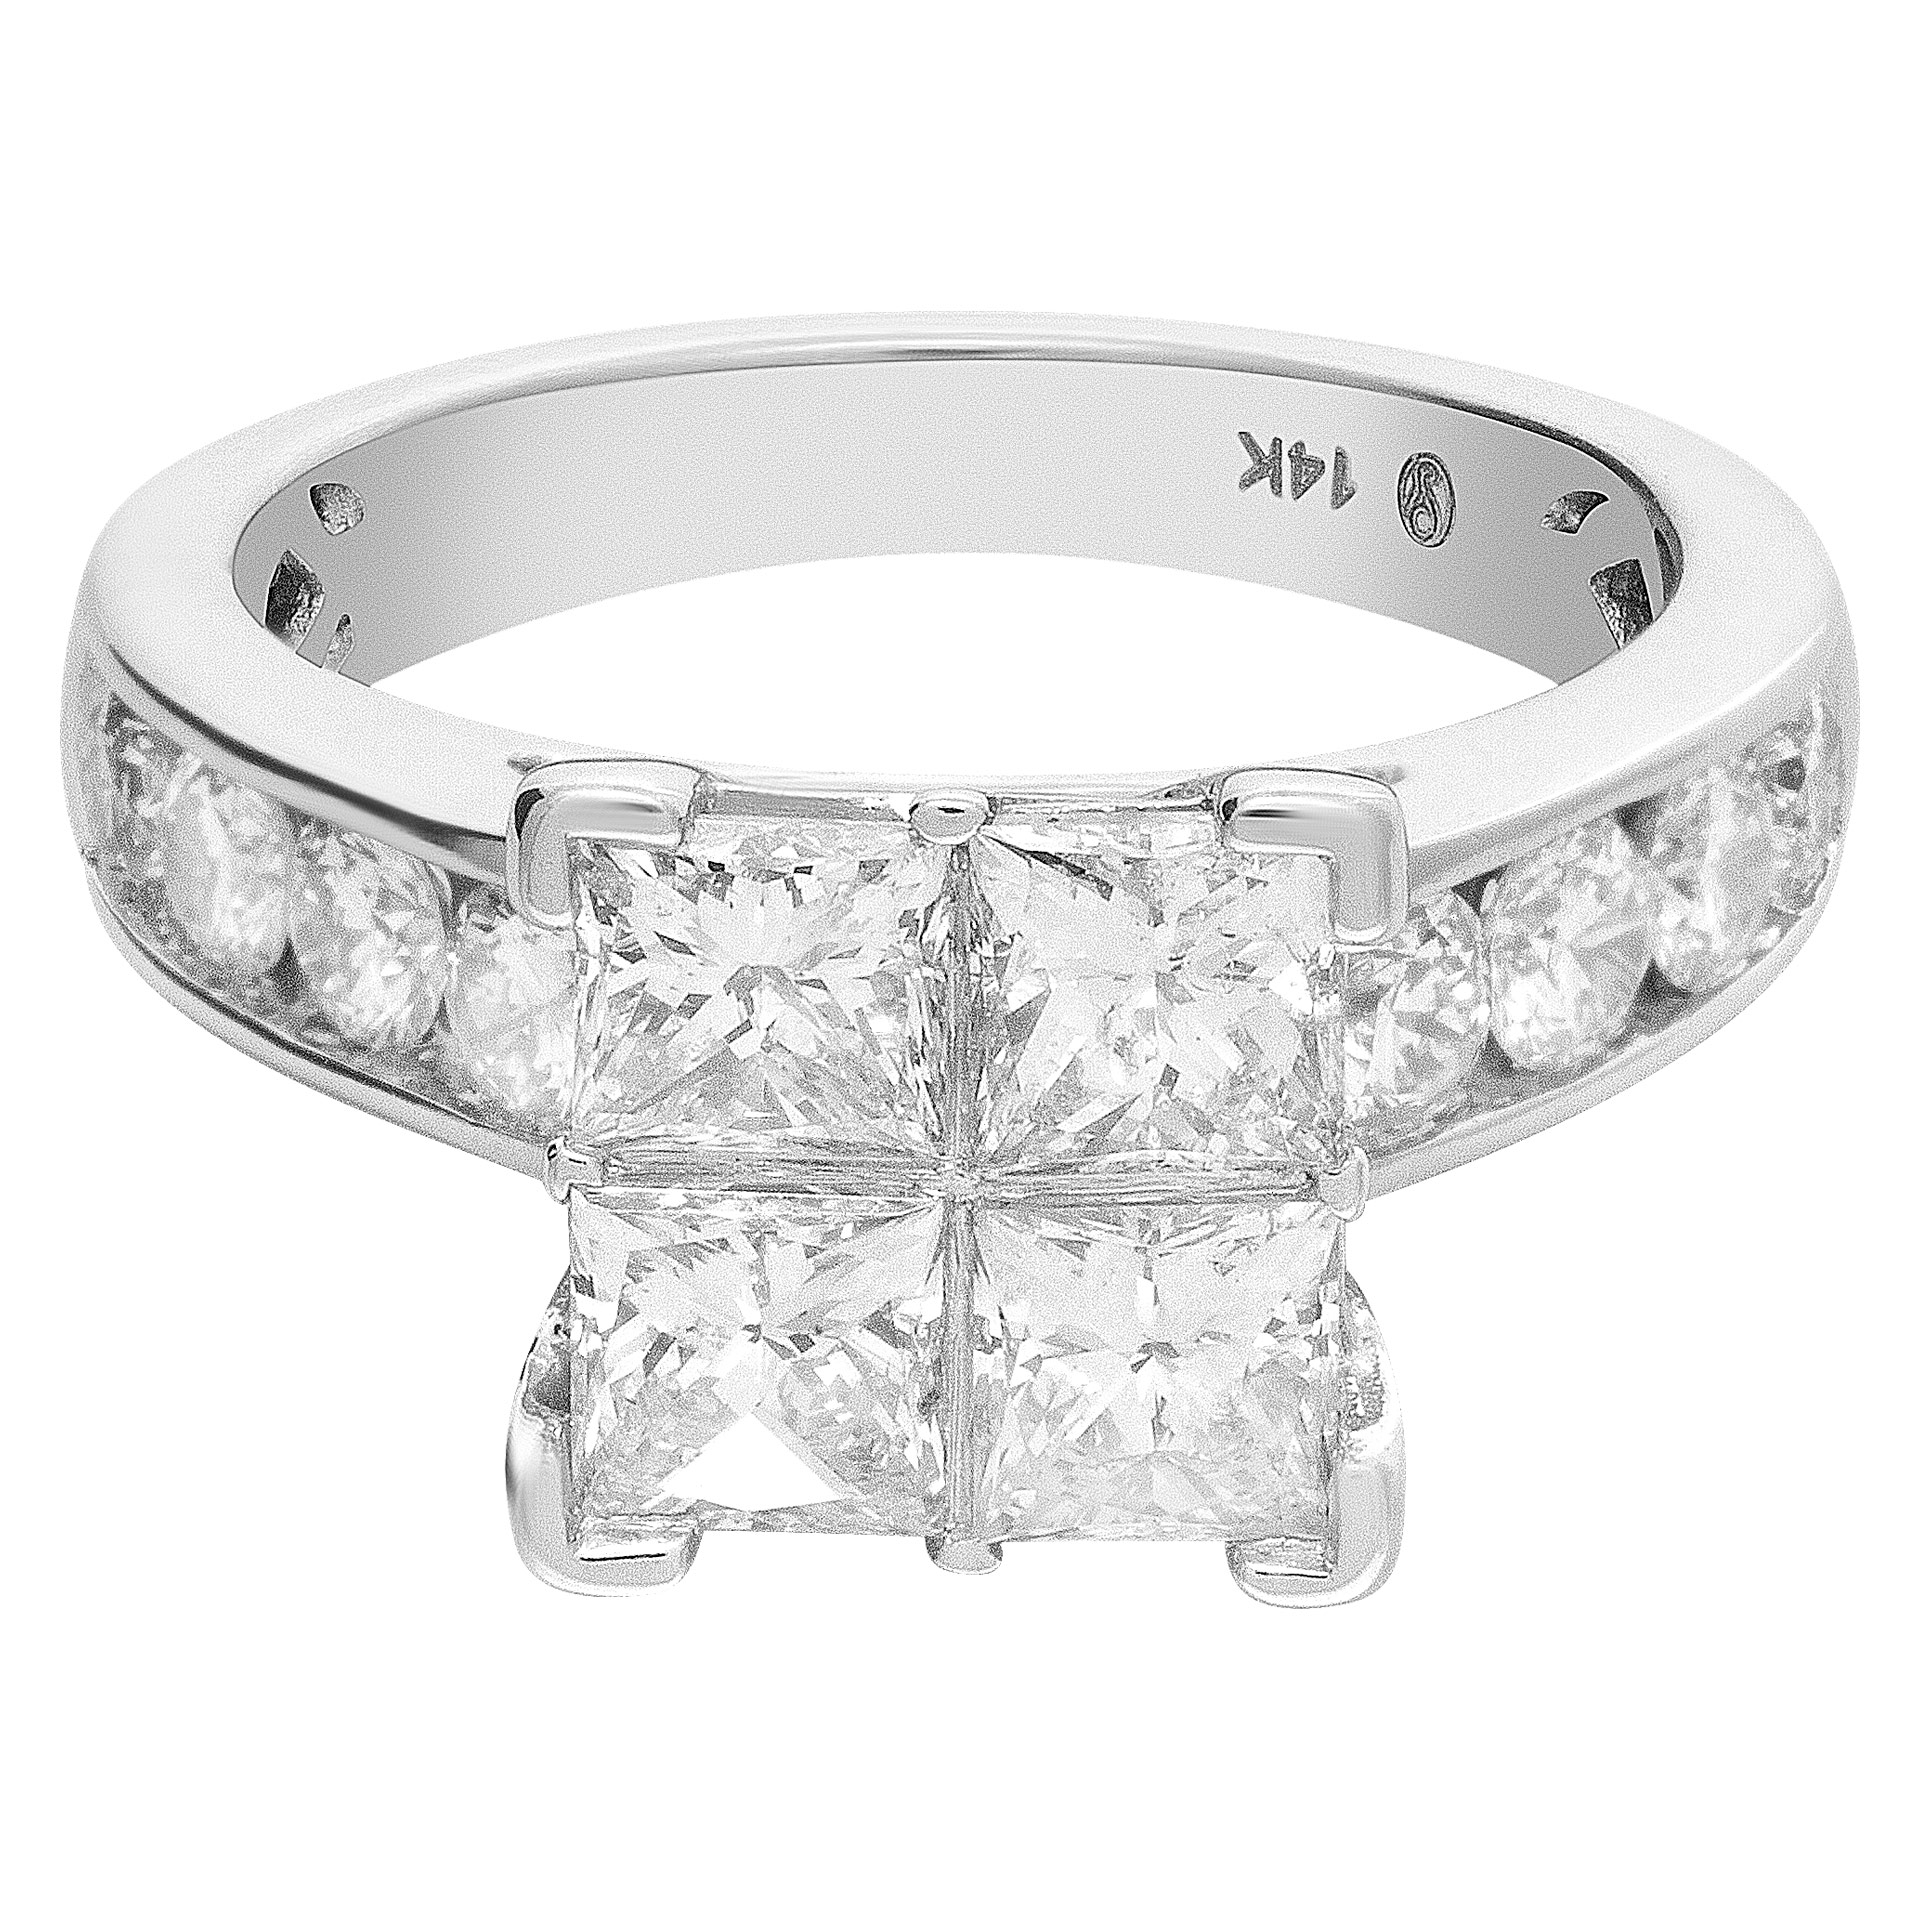 Diamond engagement ring with approx 1.00 carat in diamonds in 14k white gold